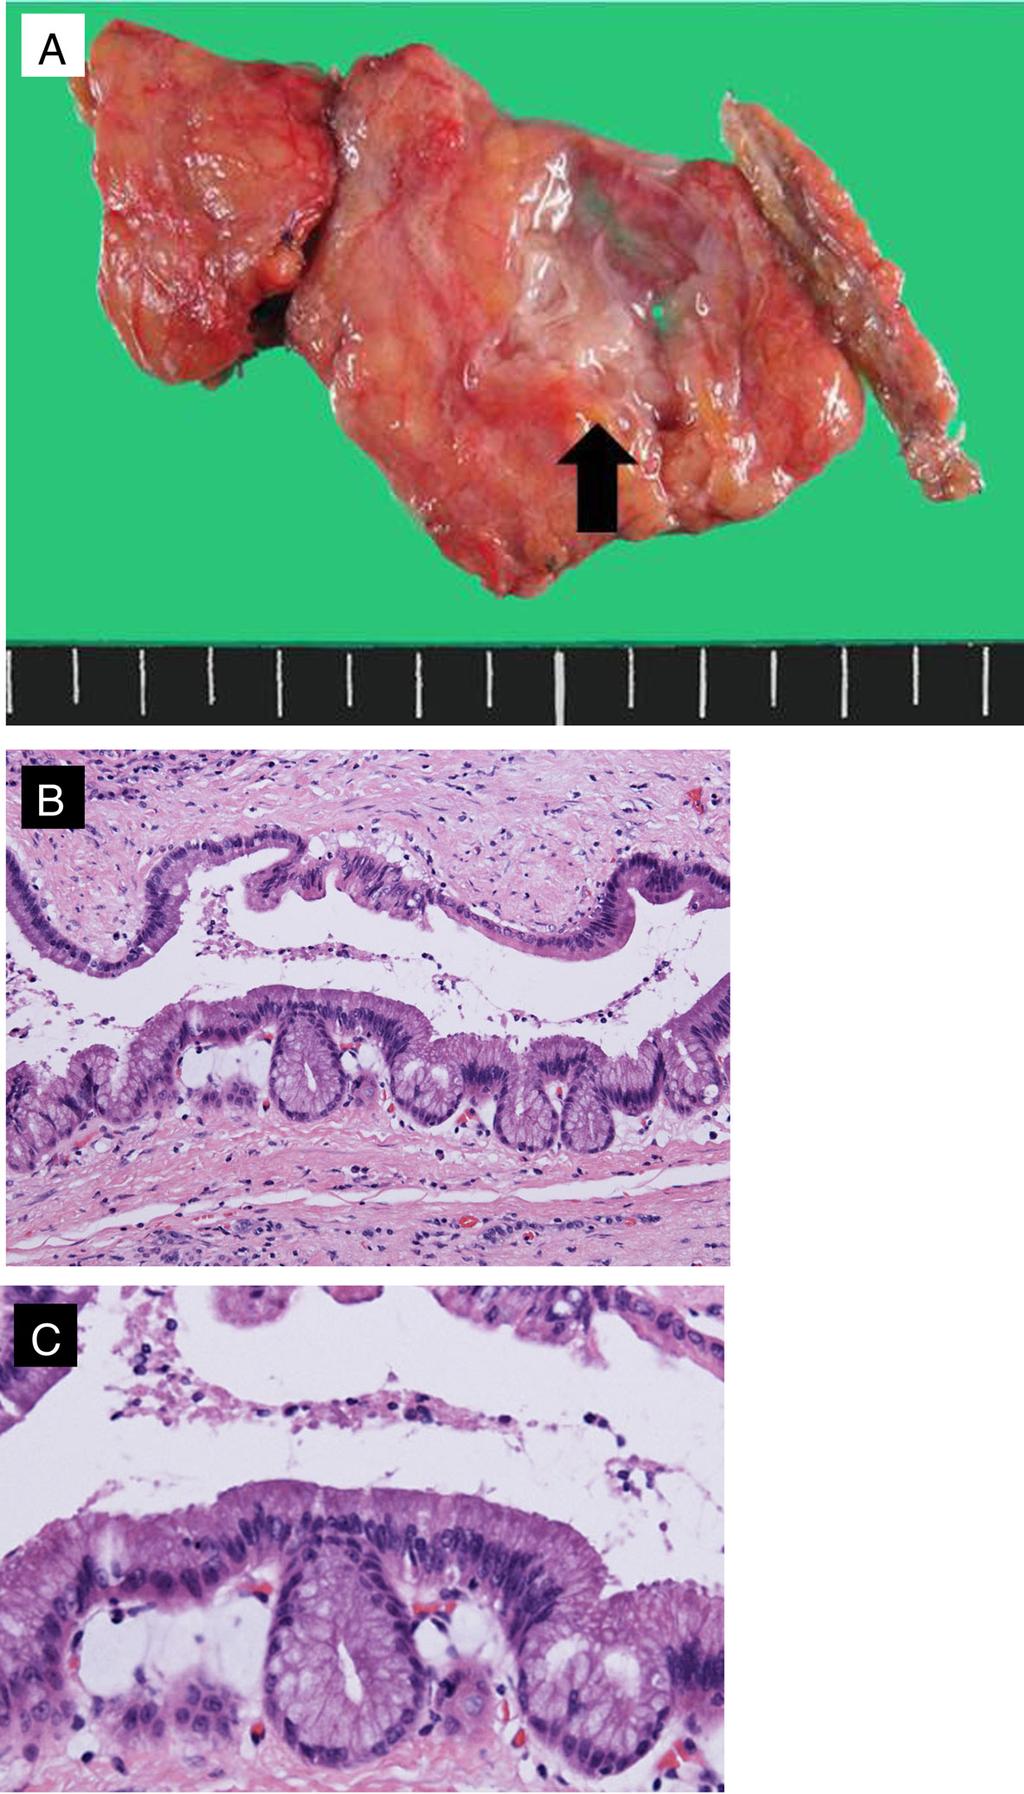 Kobayashi et al. Surgical Case Reports (2015) 1:68 Page 4 of 6 Fig. 3 Histopathological findings. a The resected specimen showed dilatation of the annular pancreatic duct.